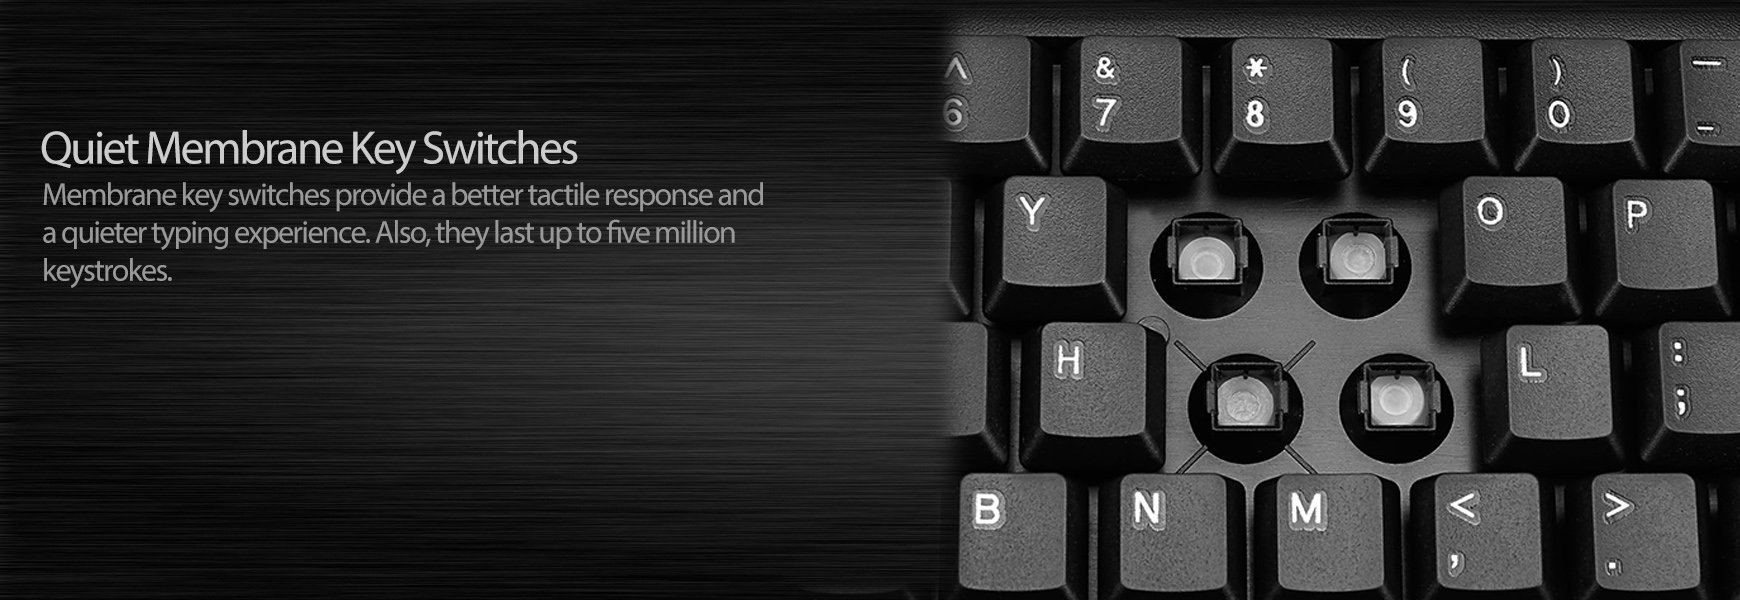 Adesso WKB-1330CB - Wireless Keyboard and Mouse Combo, Desktop Keyboard, Ambidextrous Mouse, Multimedia Hotkeys, Long Battery Life with USB Nano Receiver for Desktop/PC/Windows XP/7/8/10,Black